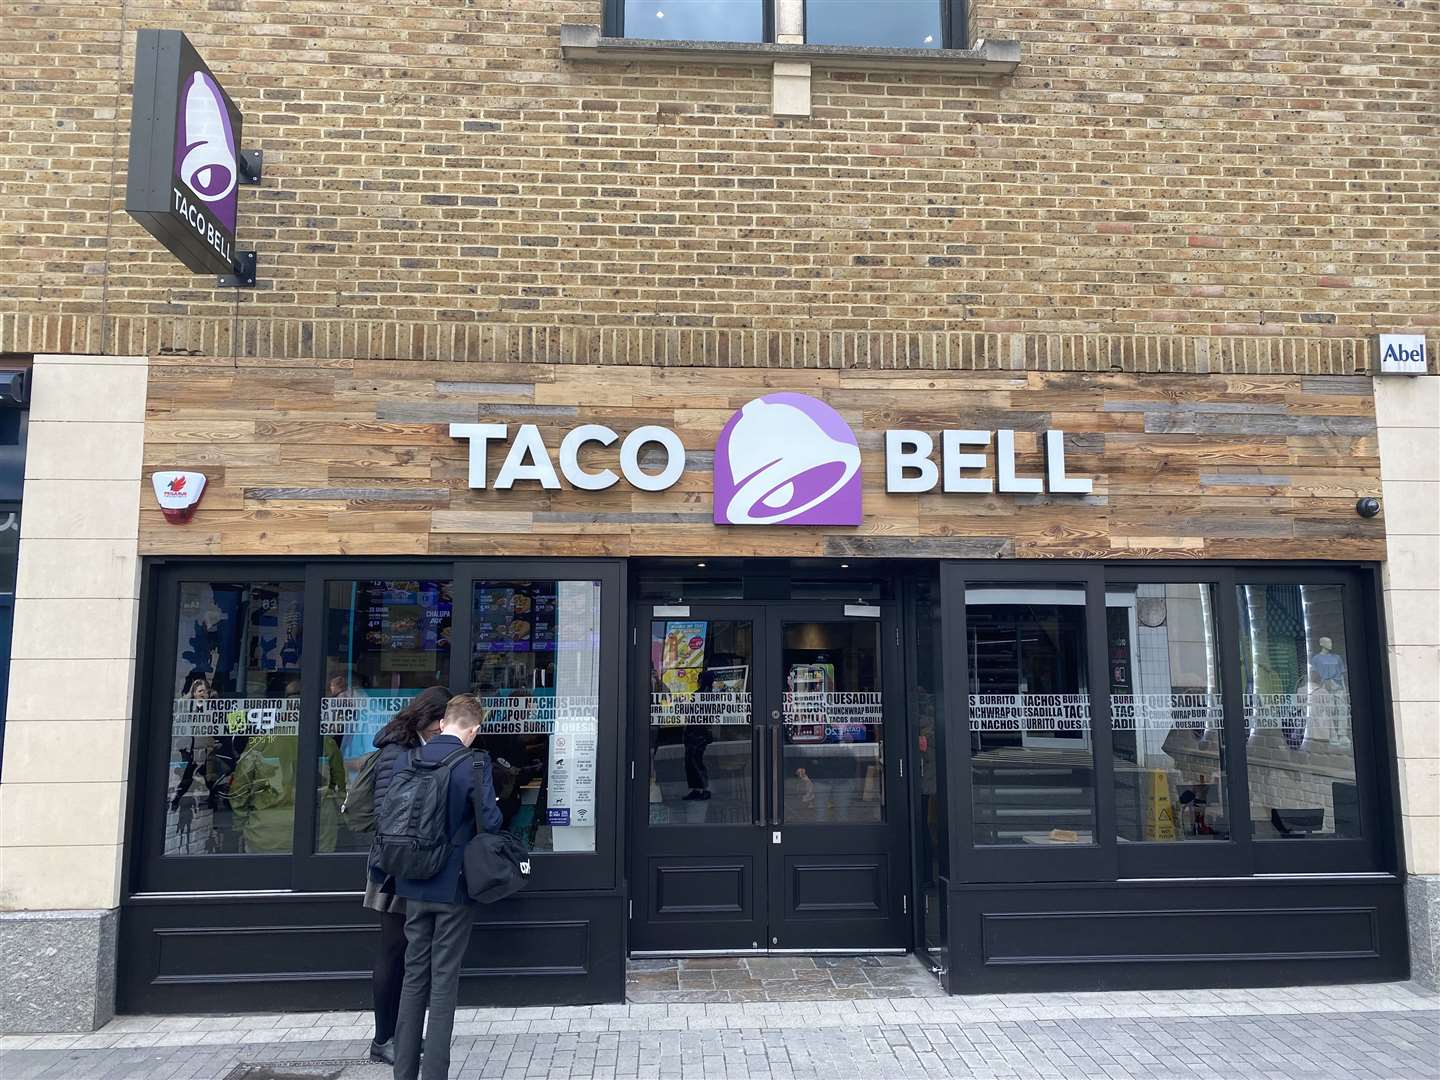 Taco Bell already operates in Maidstone